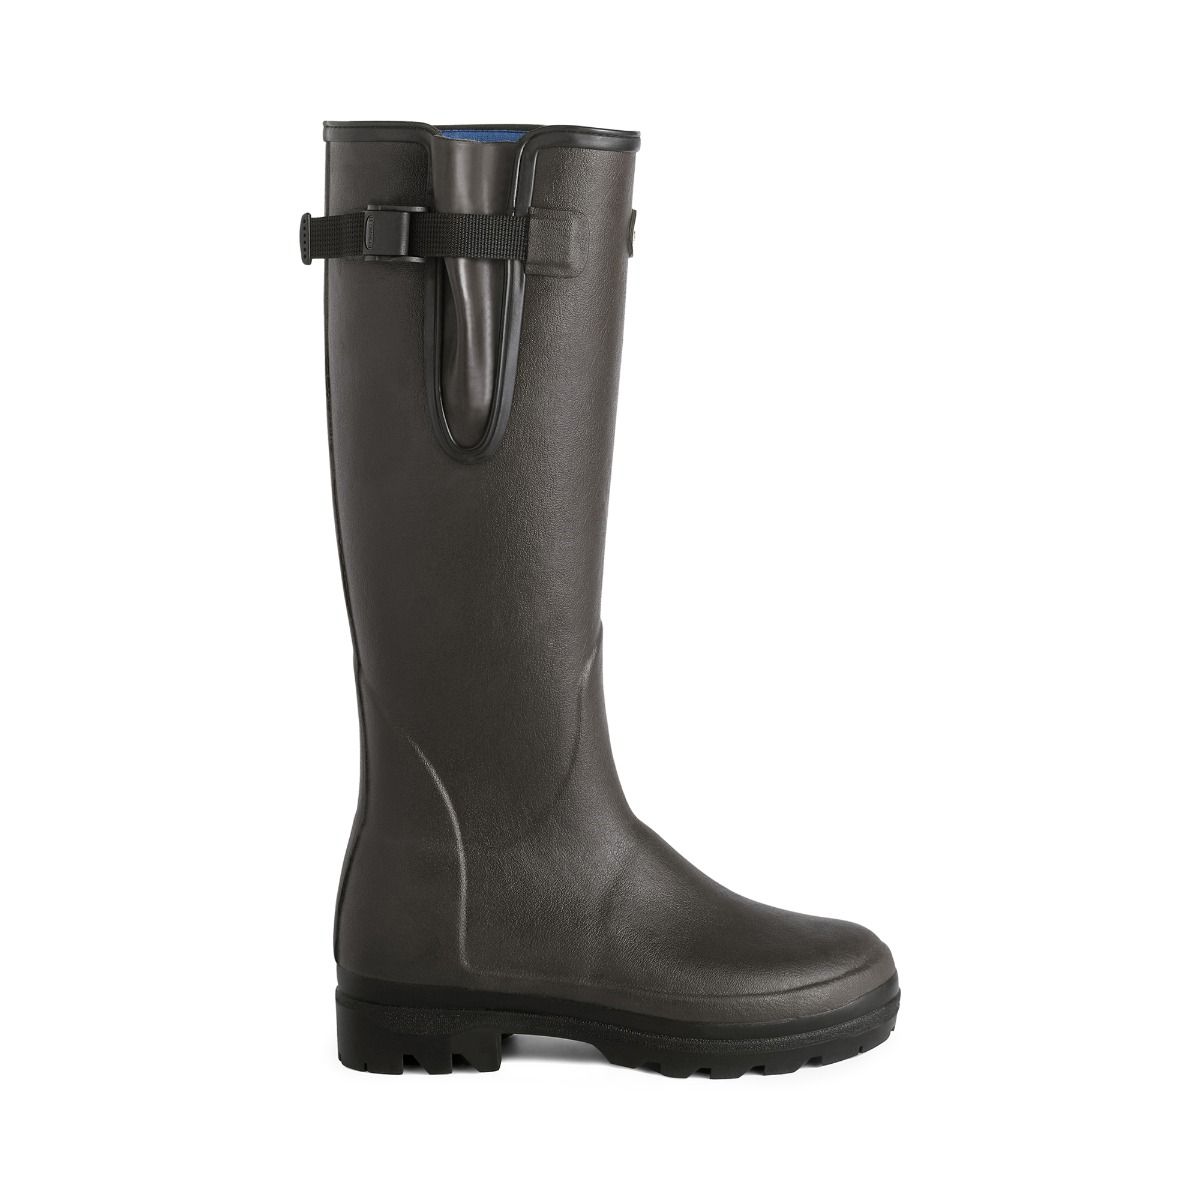 Le Chameau Womens Vierzonord Neoprene-Lined Boots